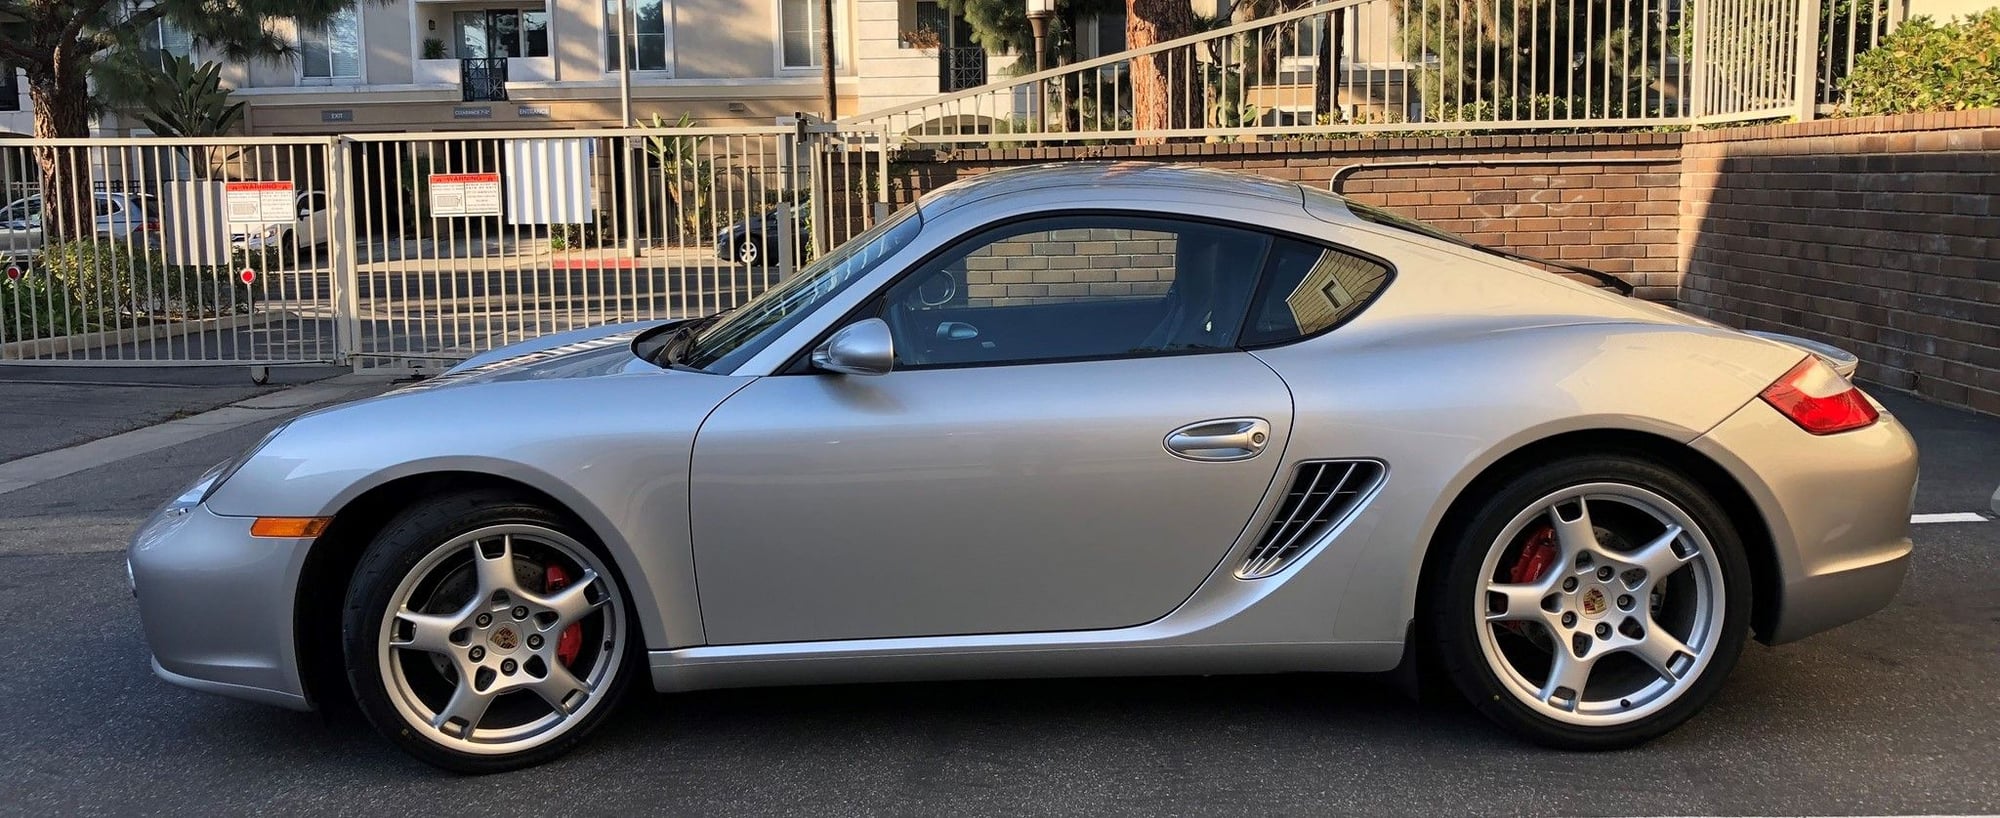 2006 Porsche Cayman - 2006 Porsche Cayman S - 32k miles.  $25,250 sale pending (first $26k takes it) - Used - VIN WP0AB29846U785983 - 32,500 Miles - 6 cyl - 2WD - Manual - Coupe - Silver - Dallas, TX 75204, United States